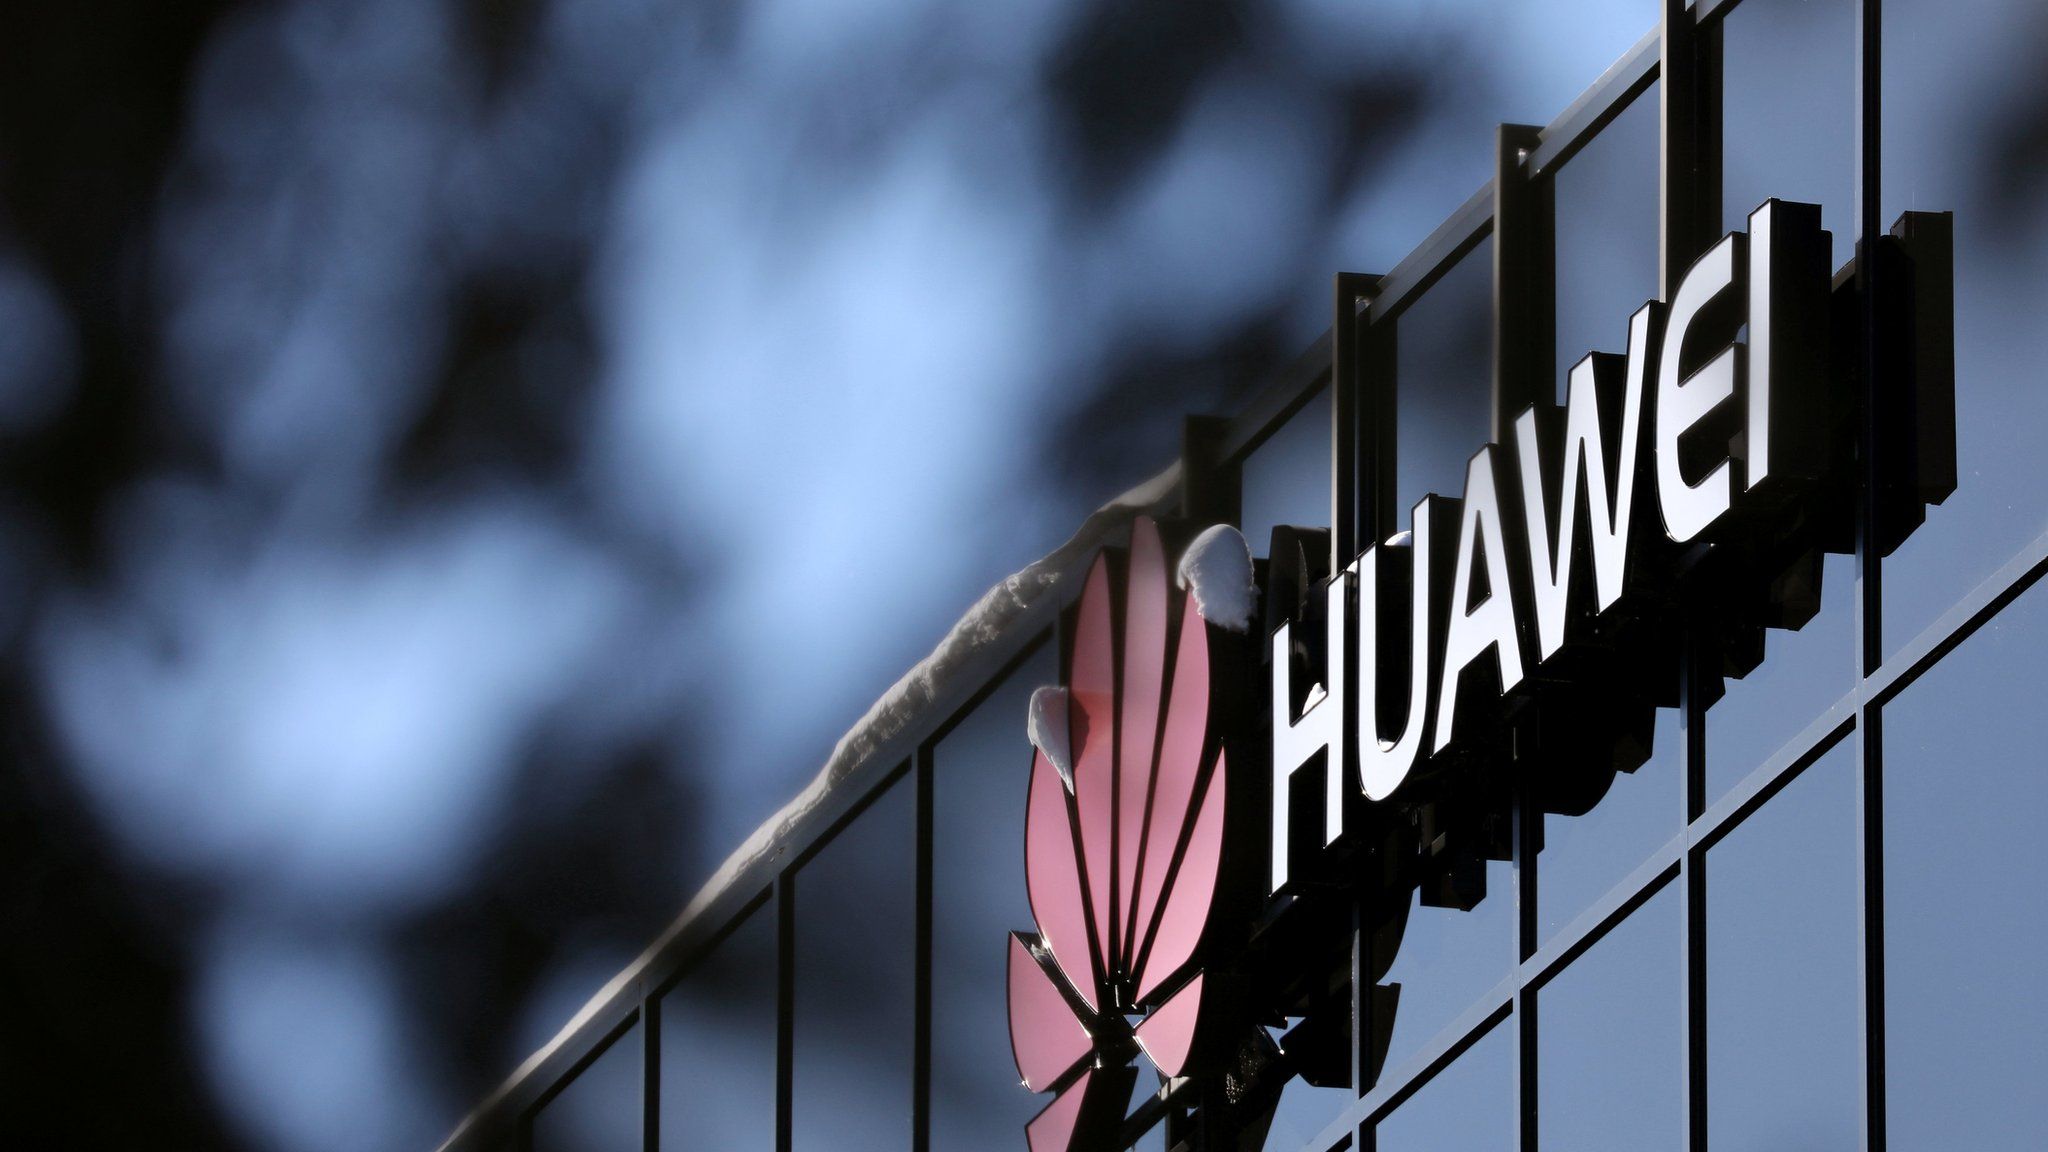 The Huawei logo outside their research facility in Ottawa, Ontario, Canada